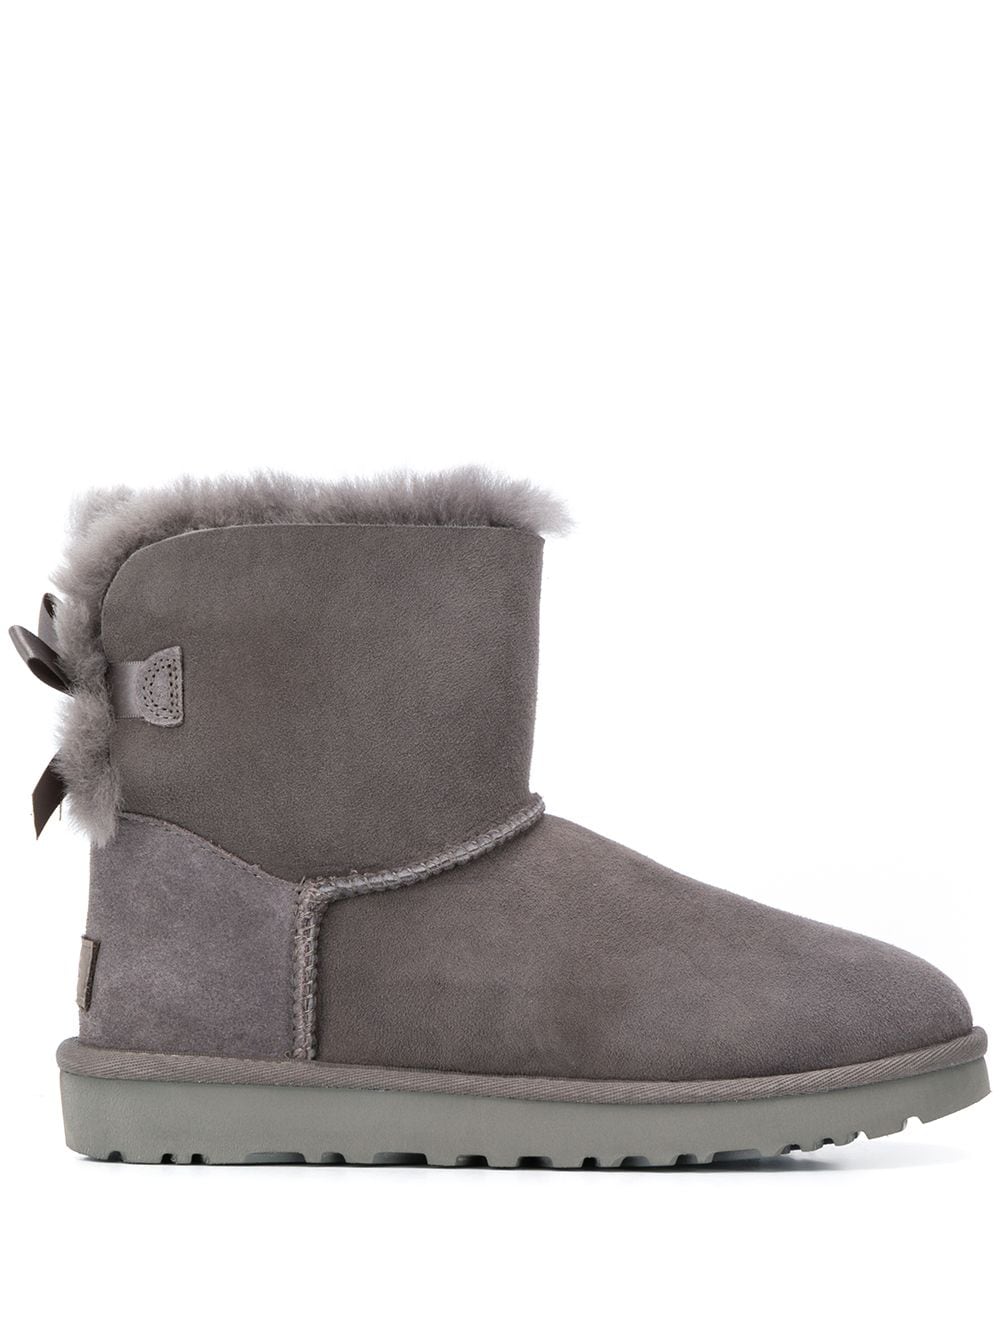 UGG bow tie boots - Grey